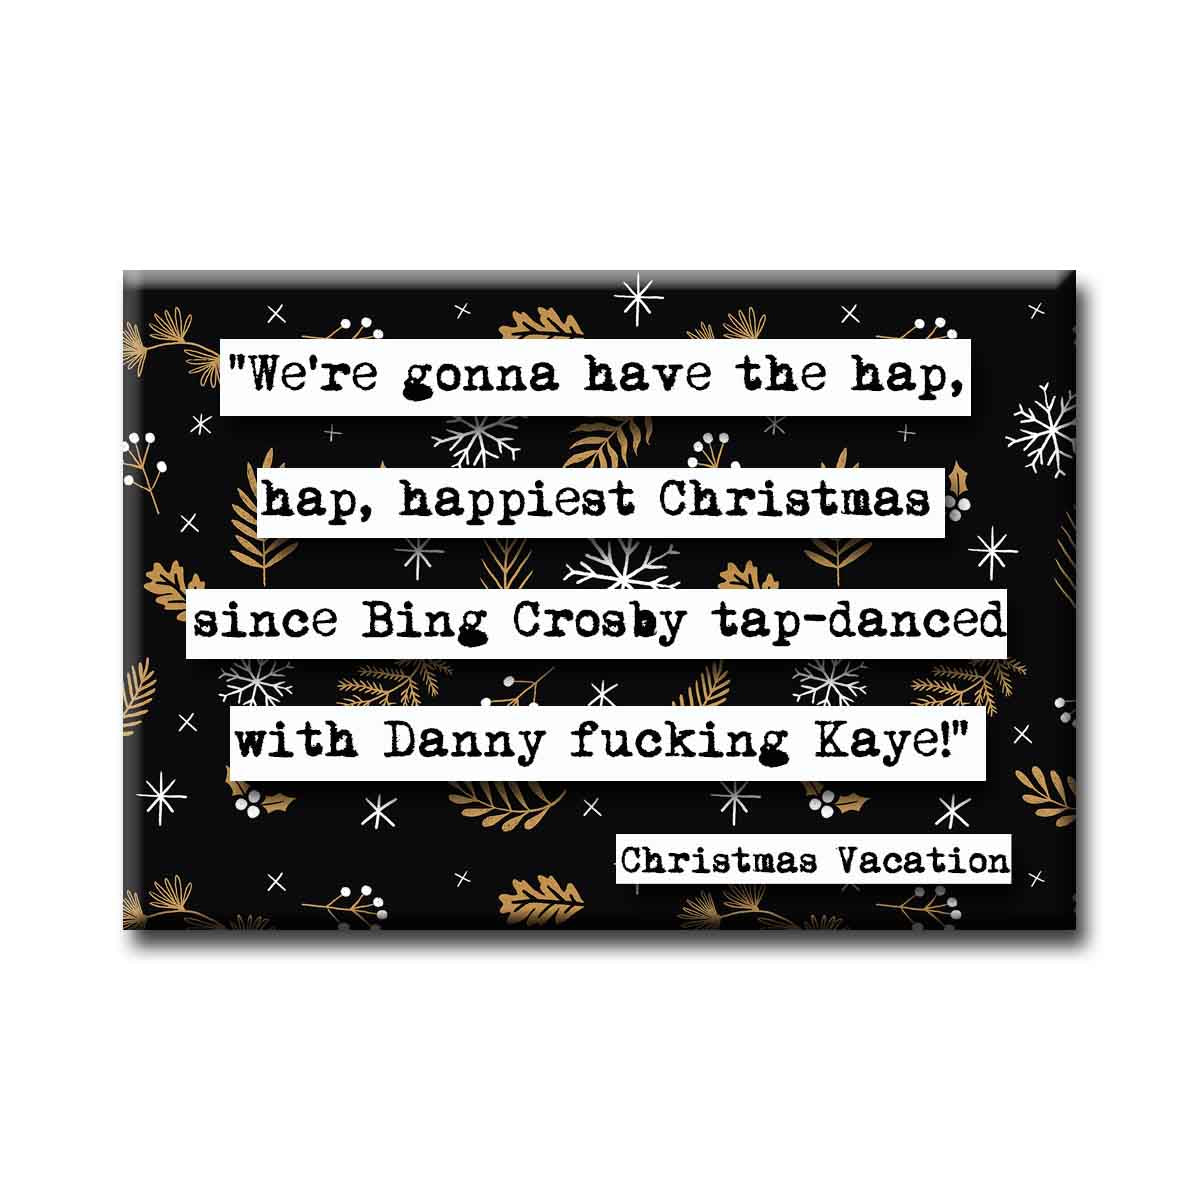 Christmas Vacation Hap Hap Happiest Christmas Quote Magnet  (no.18c)